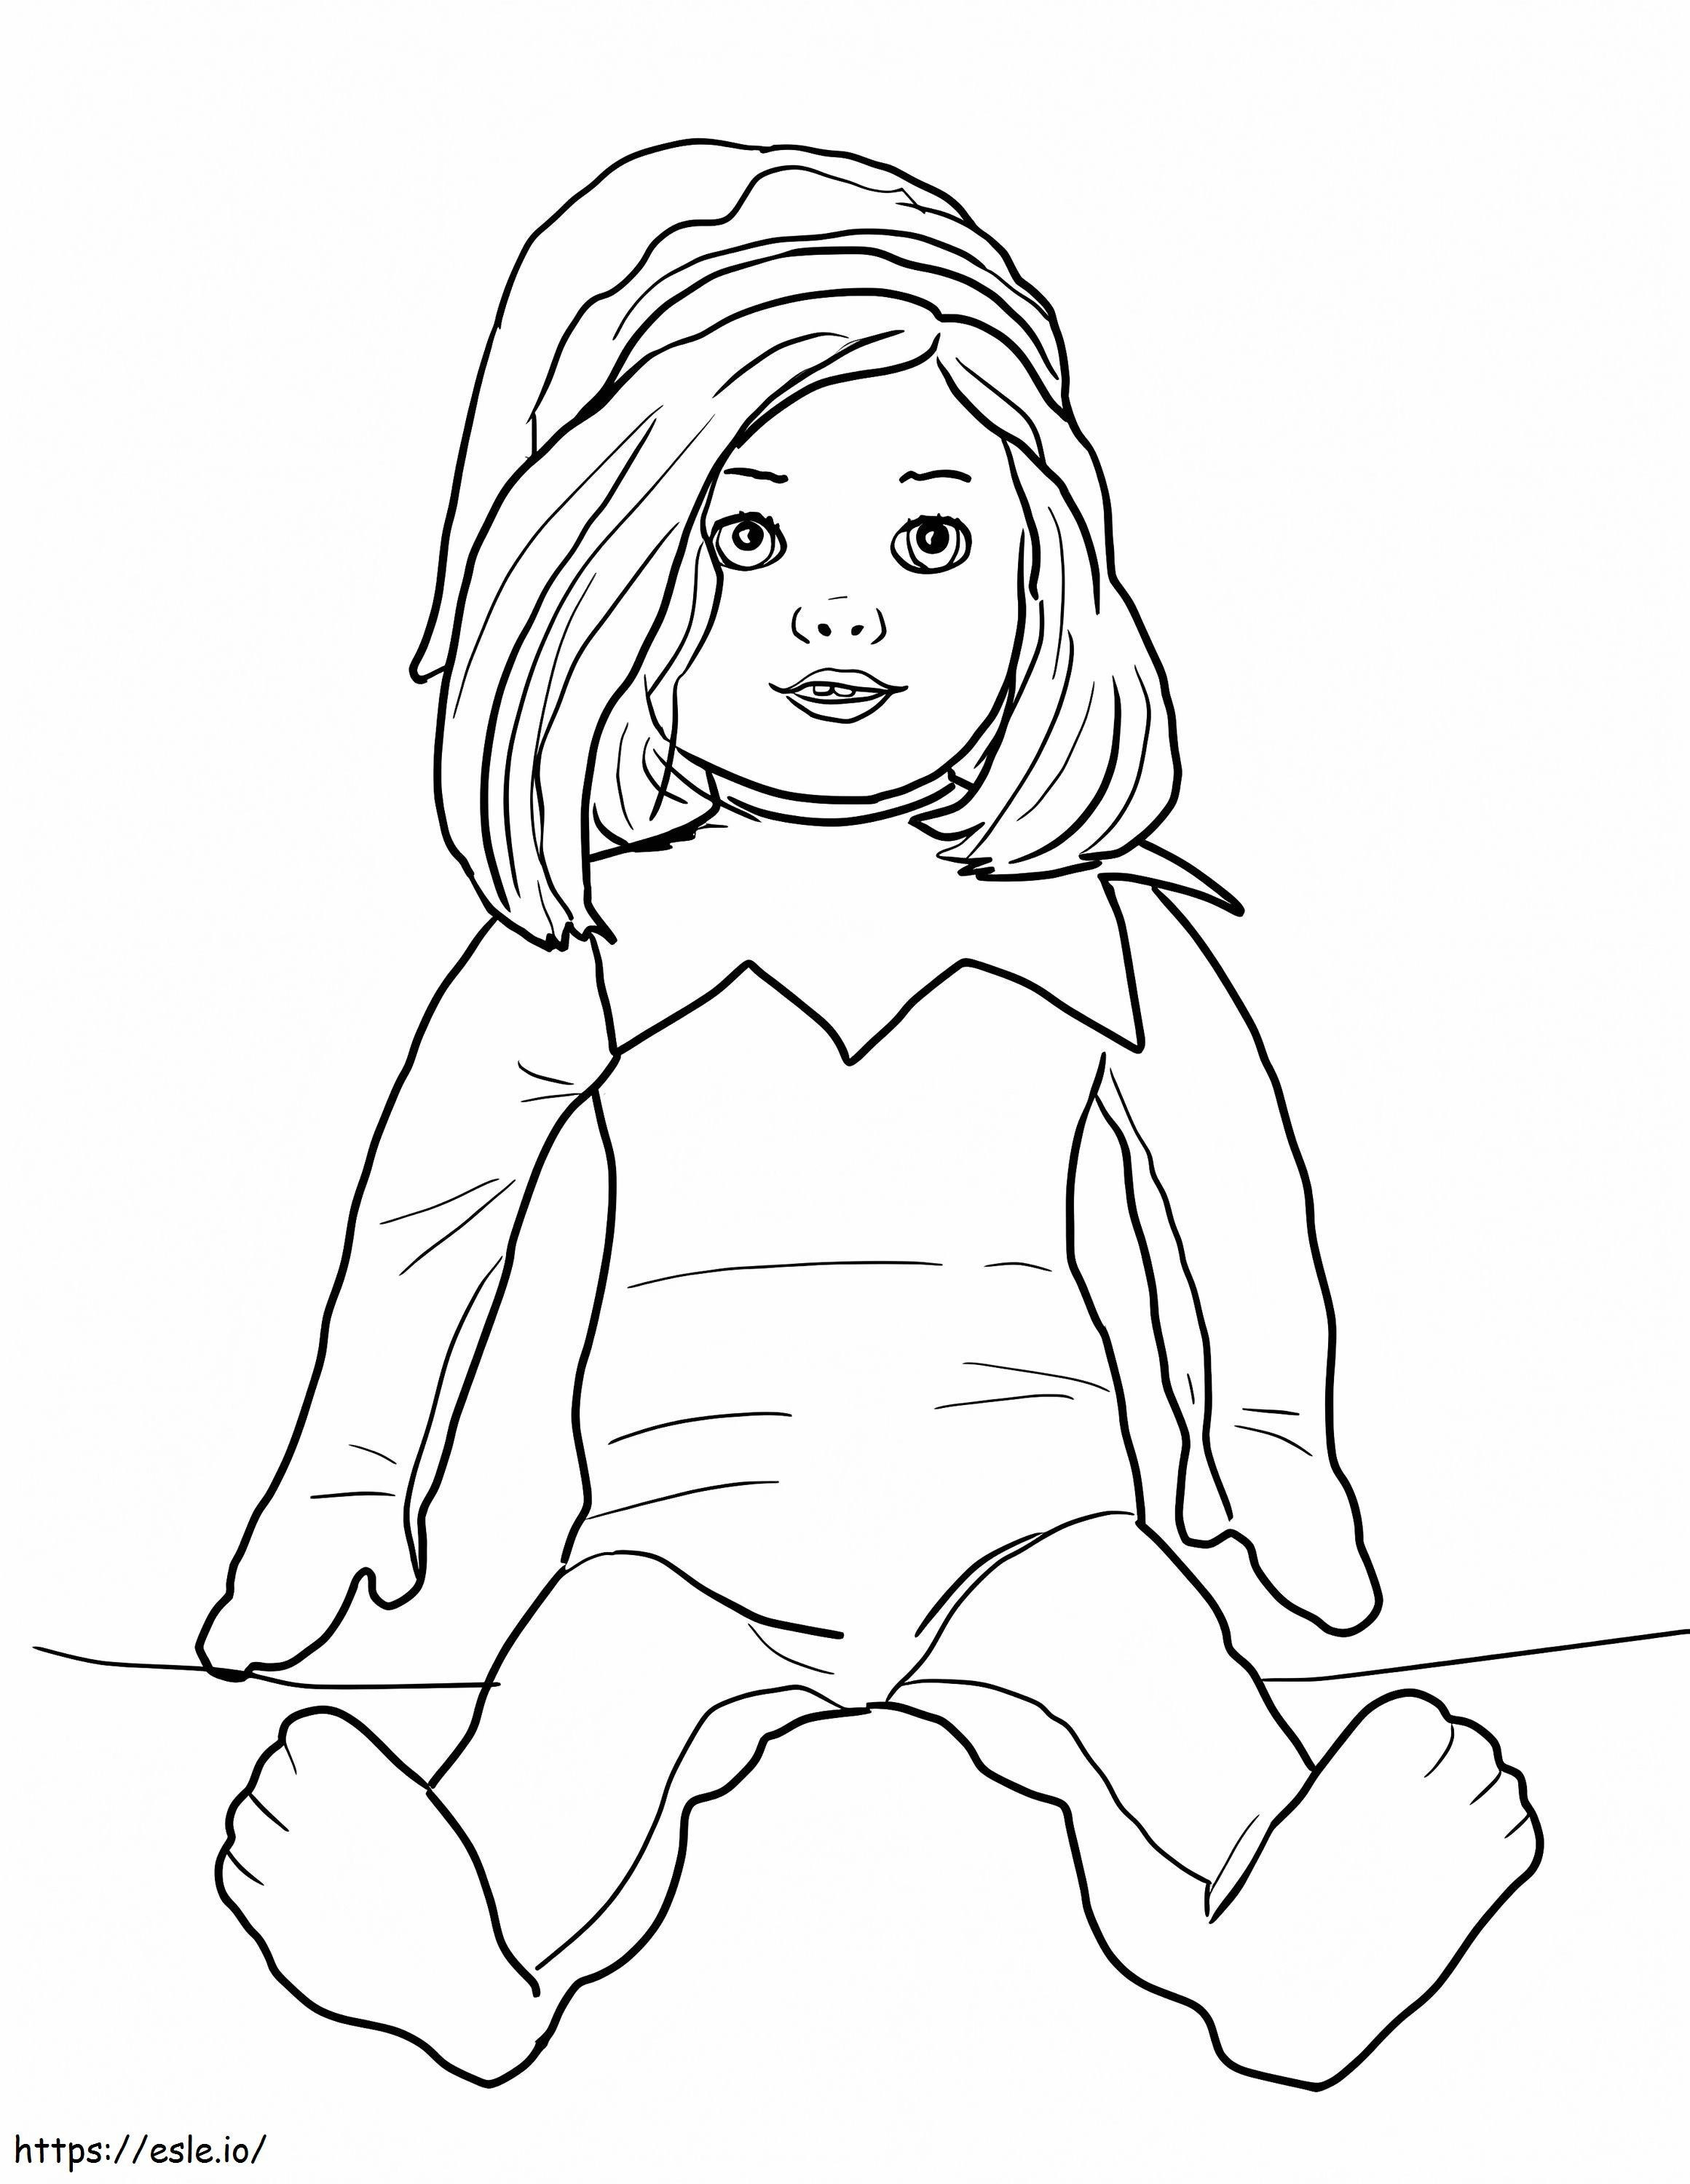 Girl Elf On The Shelf coloring page